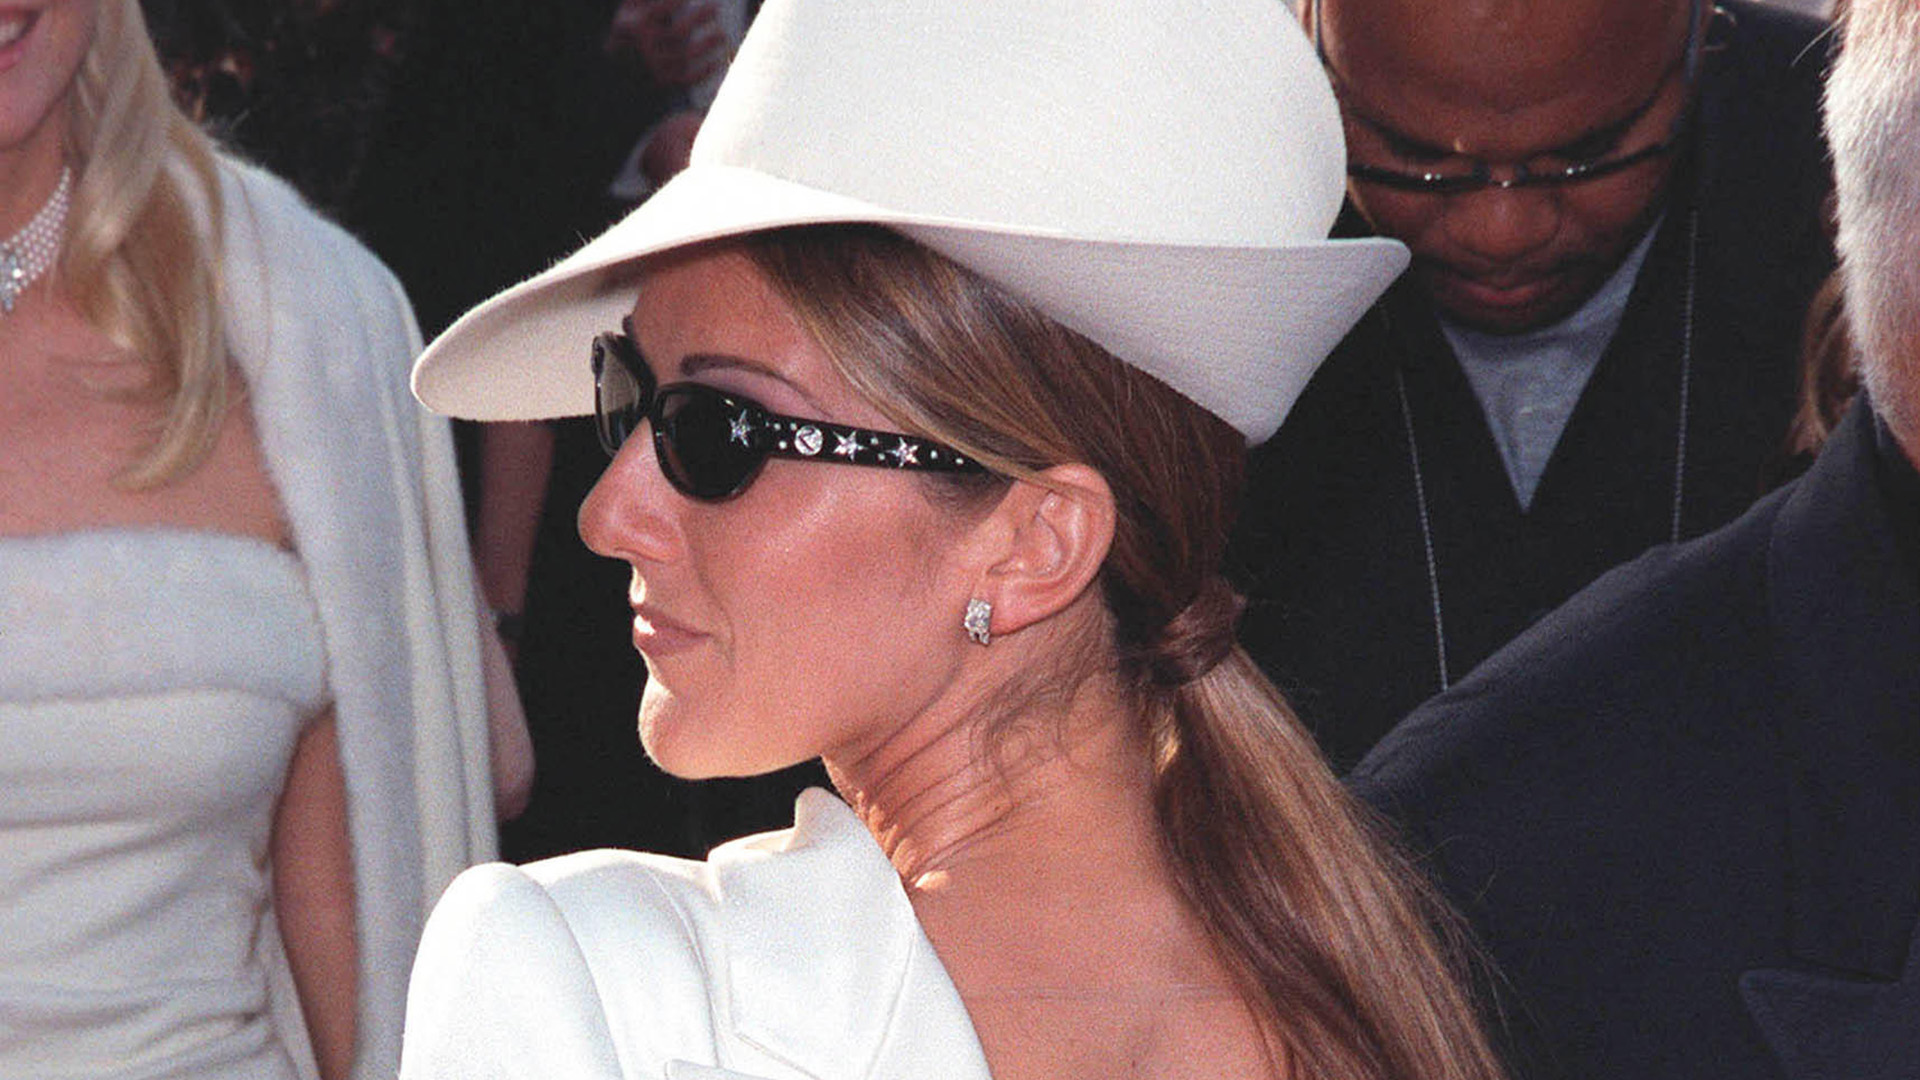 5 Biggest Celebrity Fashion Fails That Somehow Became Iconic